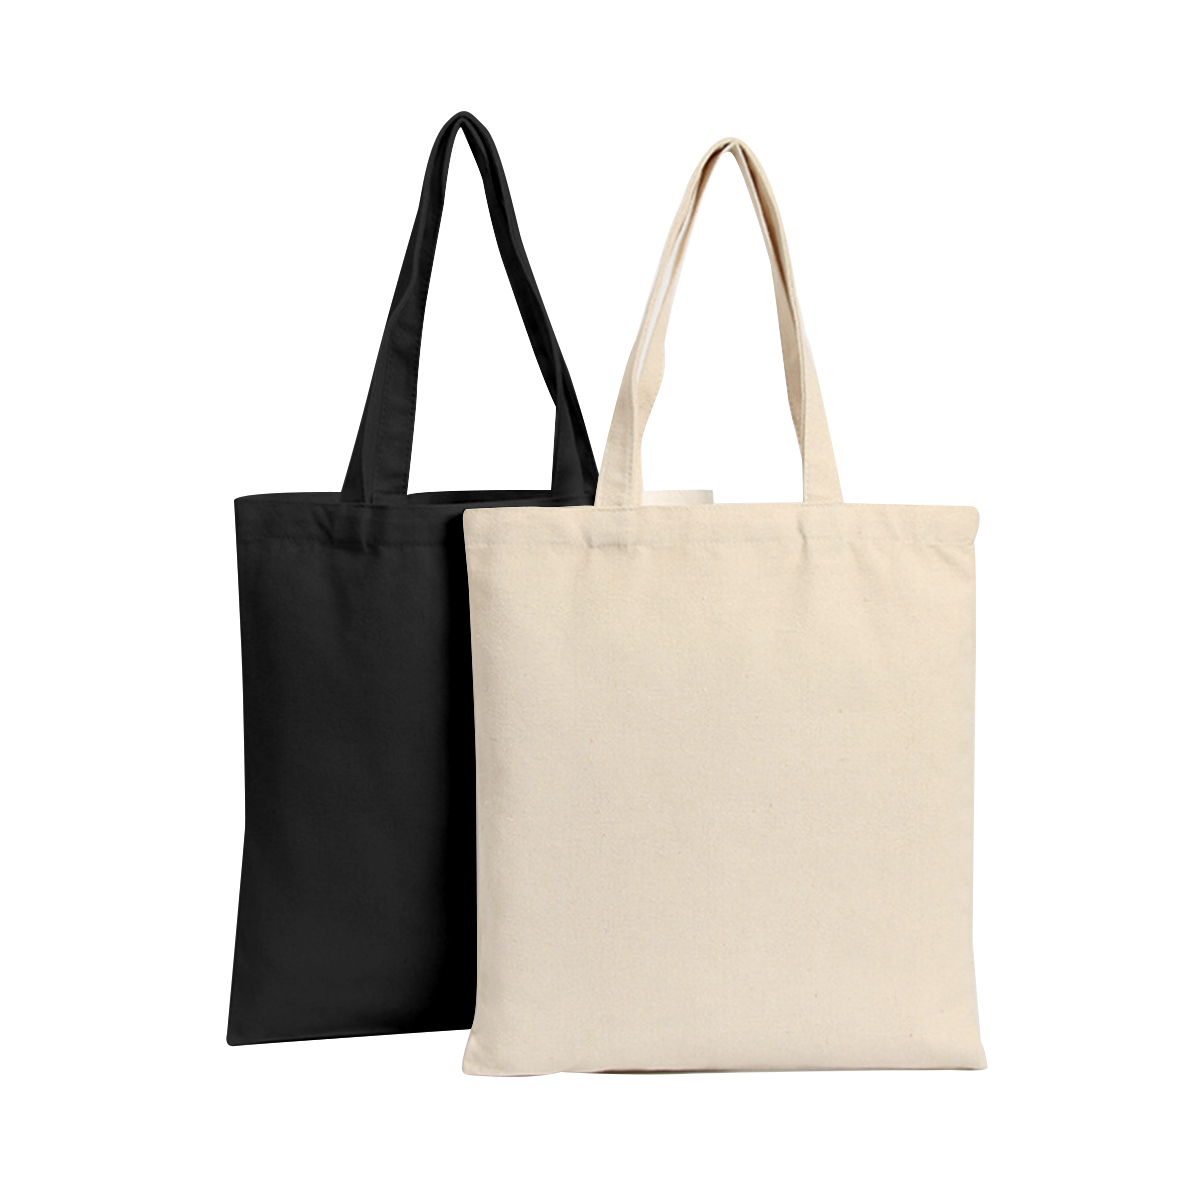 A4 Size Canvas Tote Bag